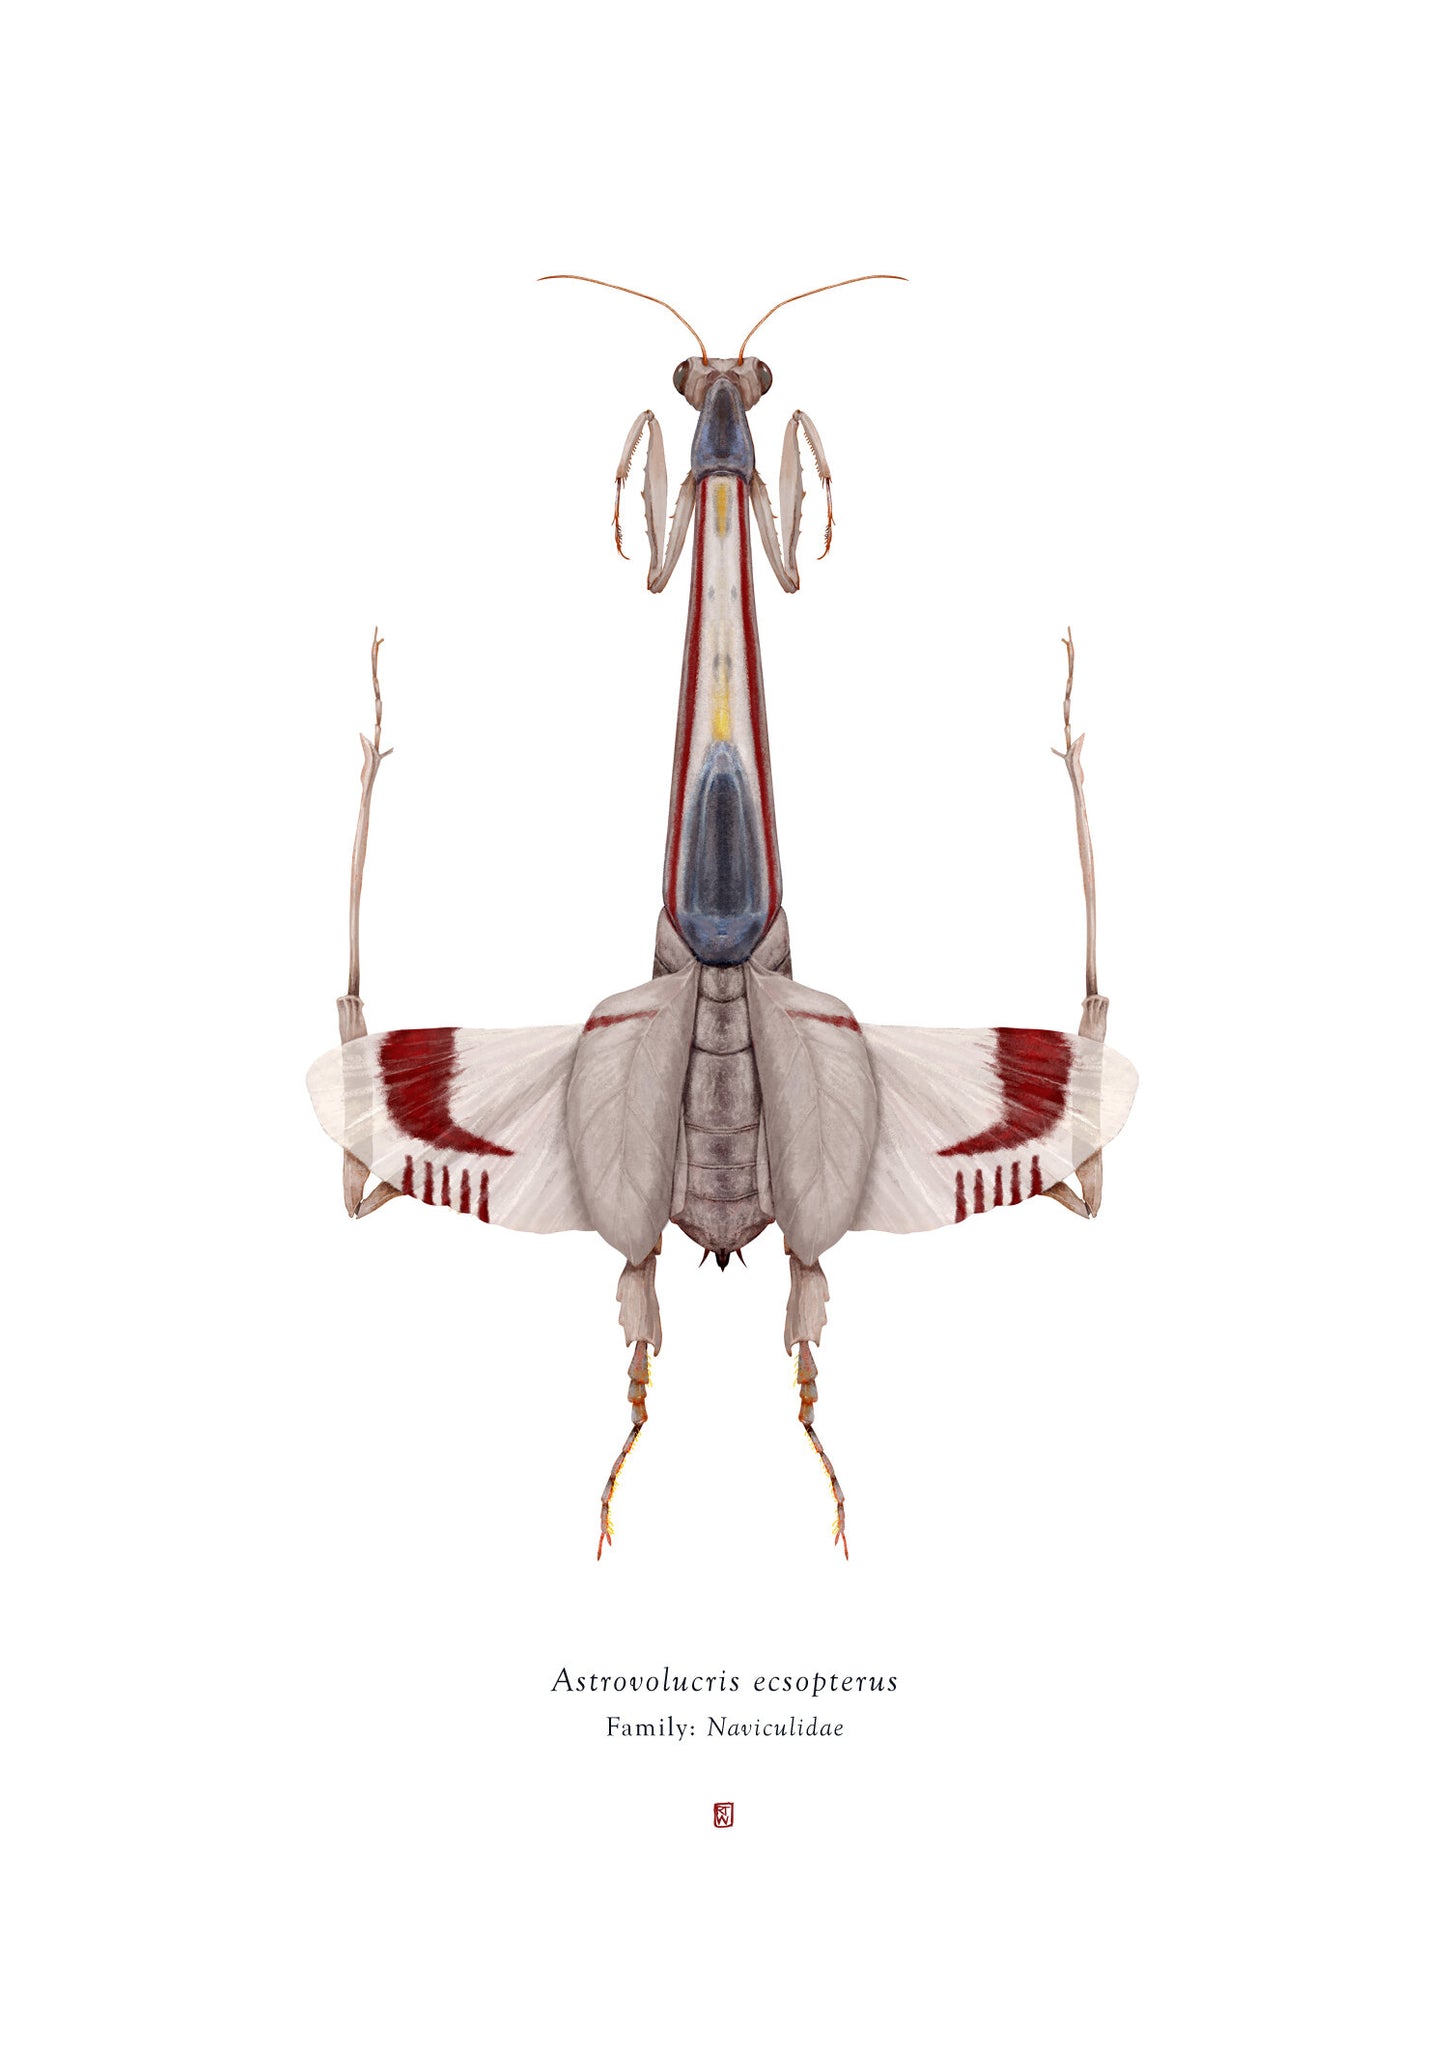 Richard Wilkinson - Astrovolucris Ecsopterus (X-Wing Starfighter) (Star Wars Insects - A2 Print)